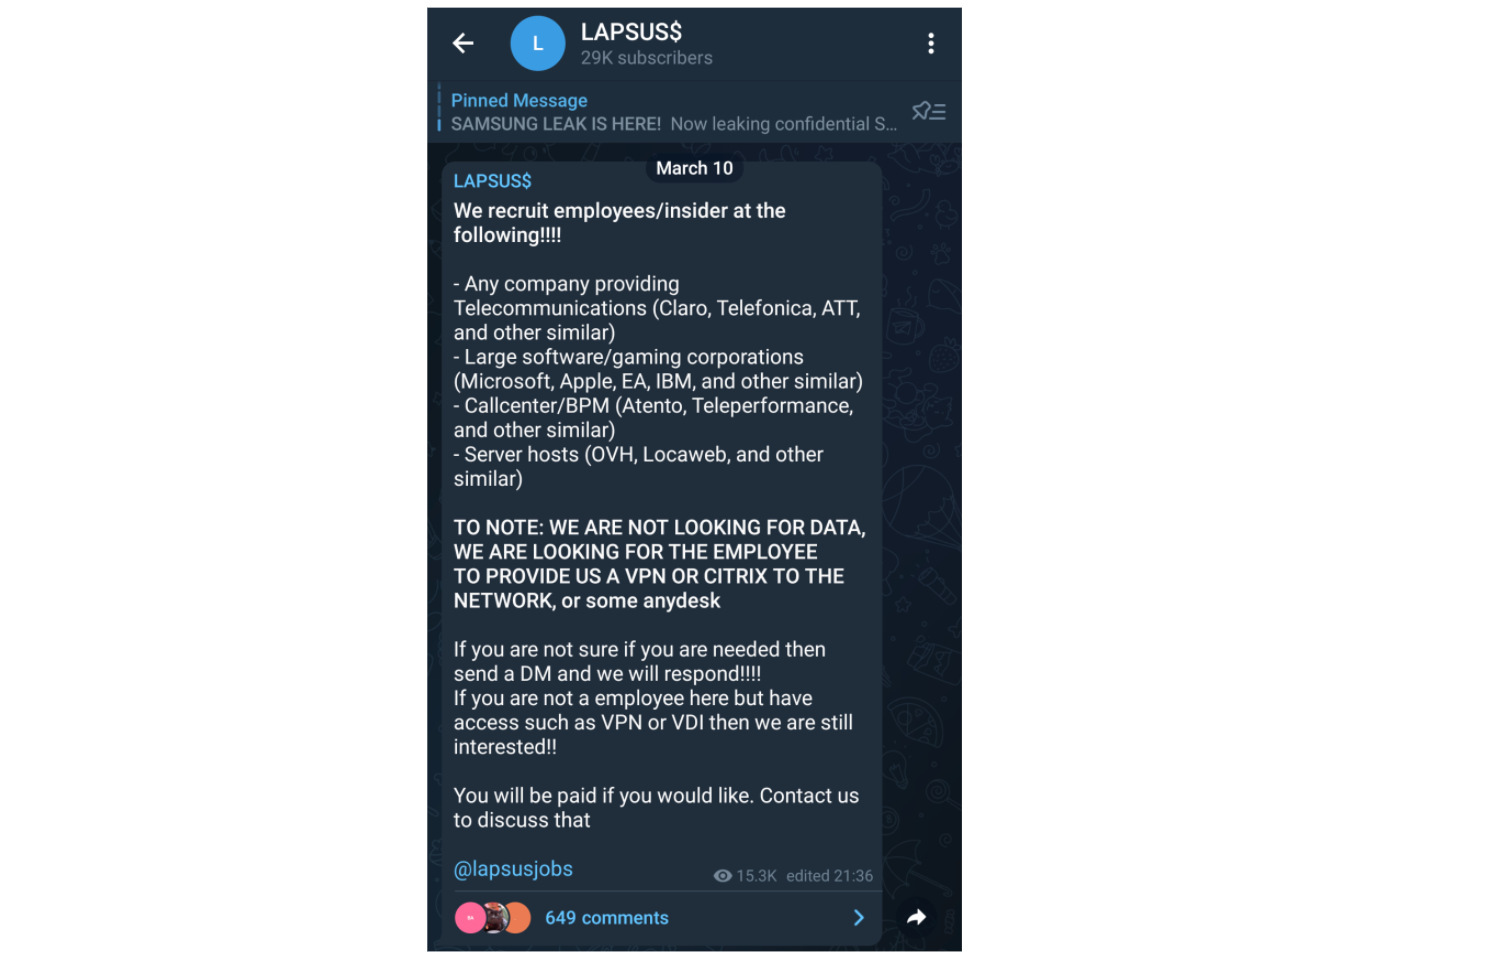 Lapsus telegram account showing call for employees